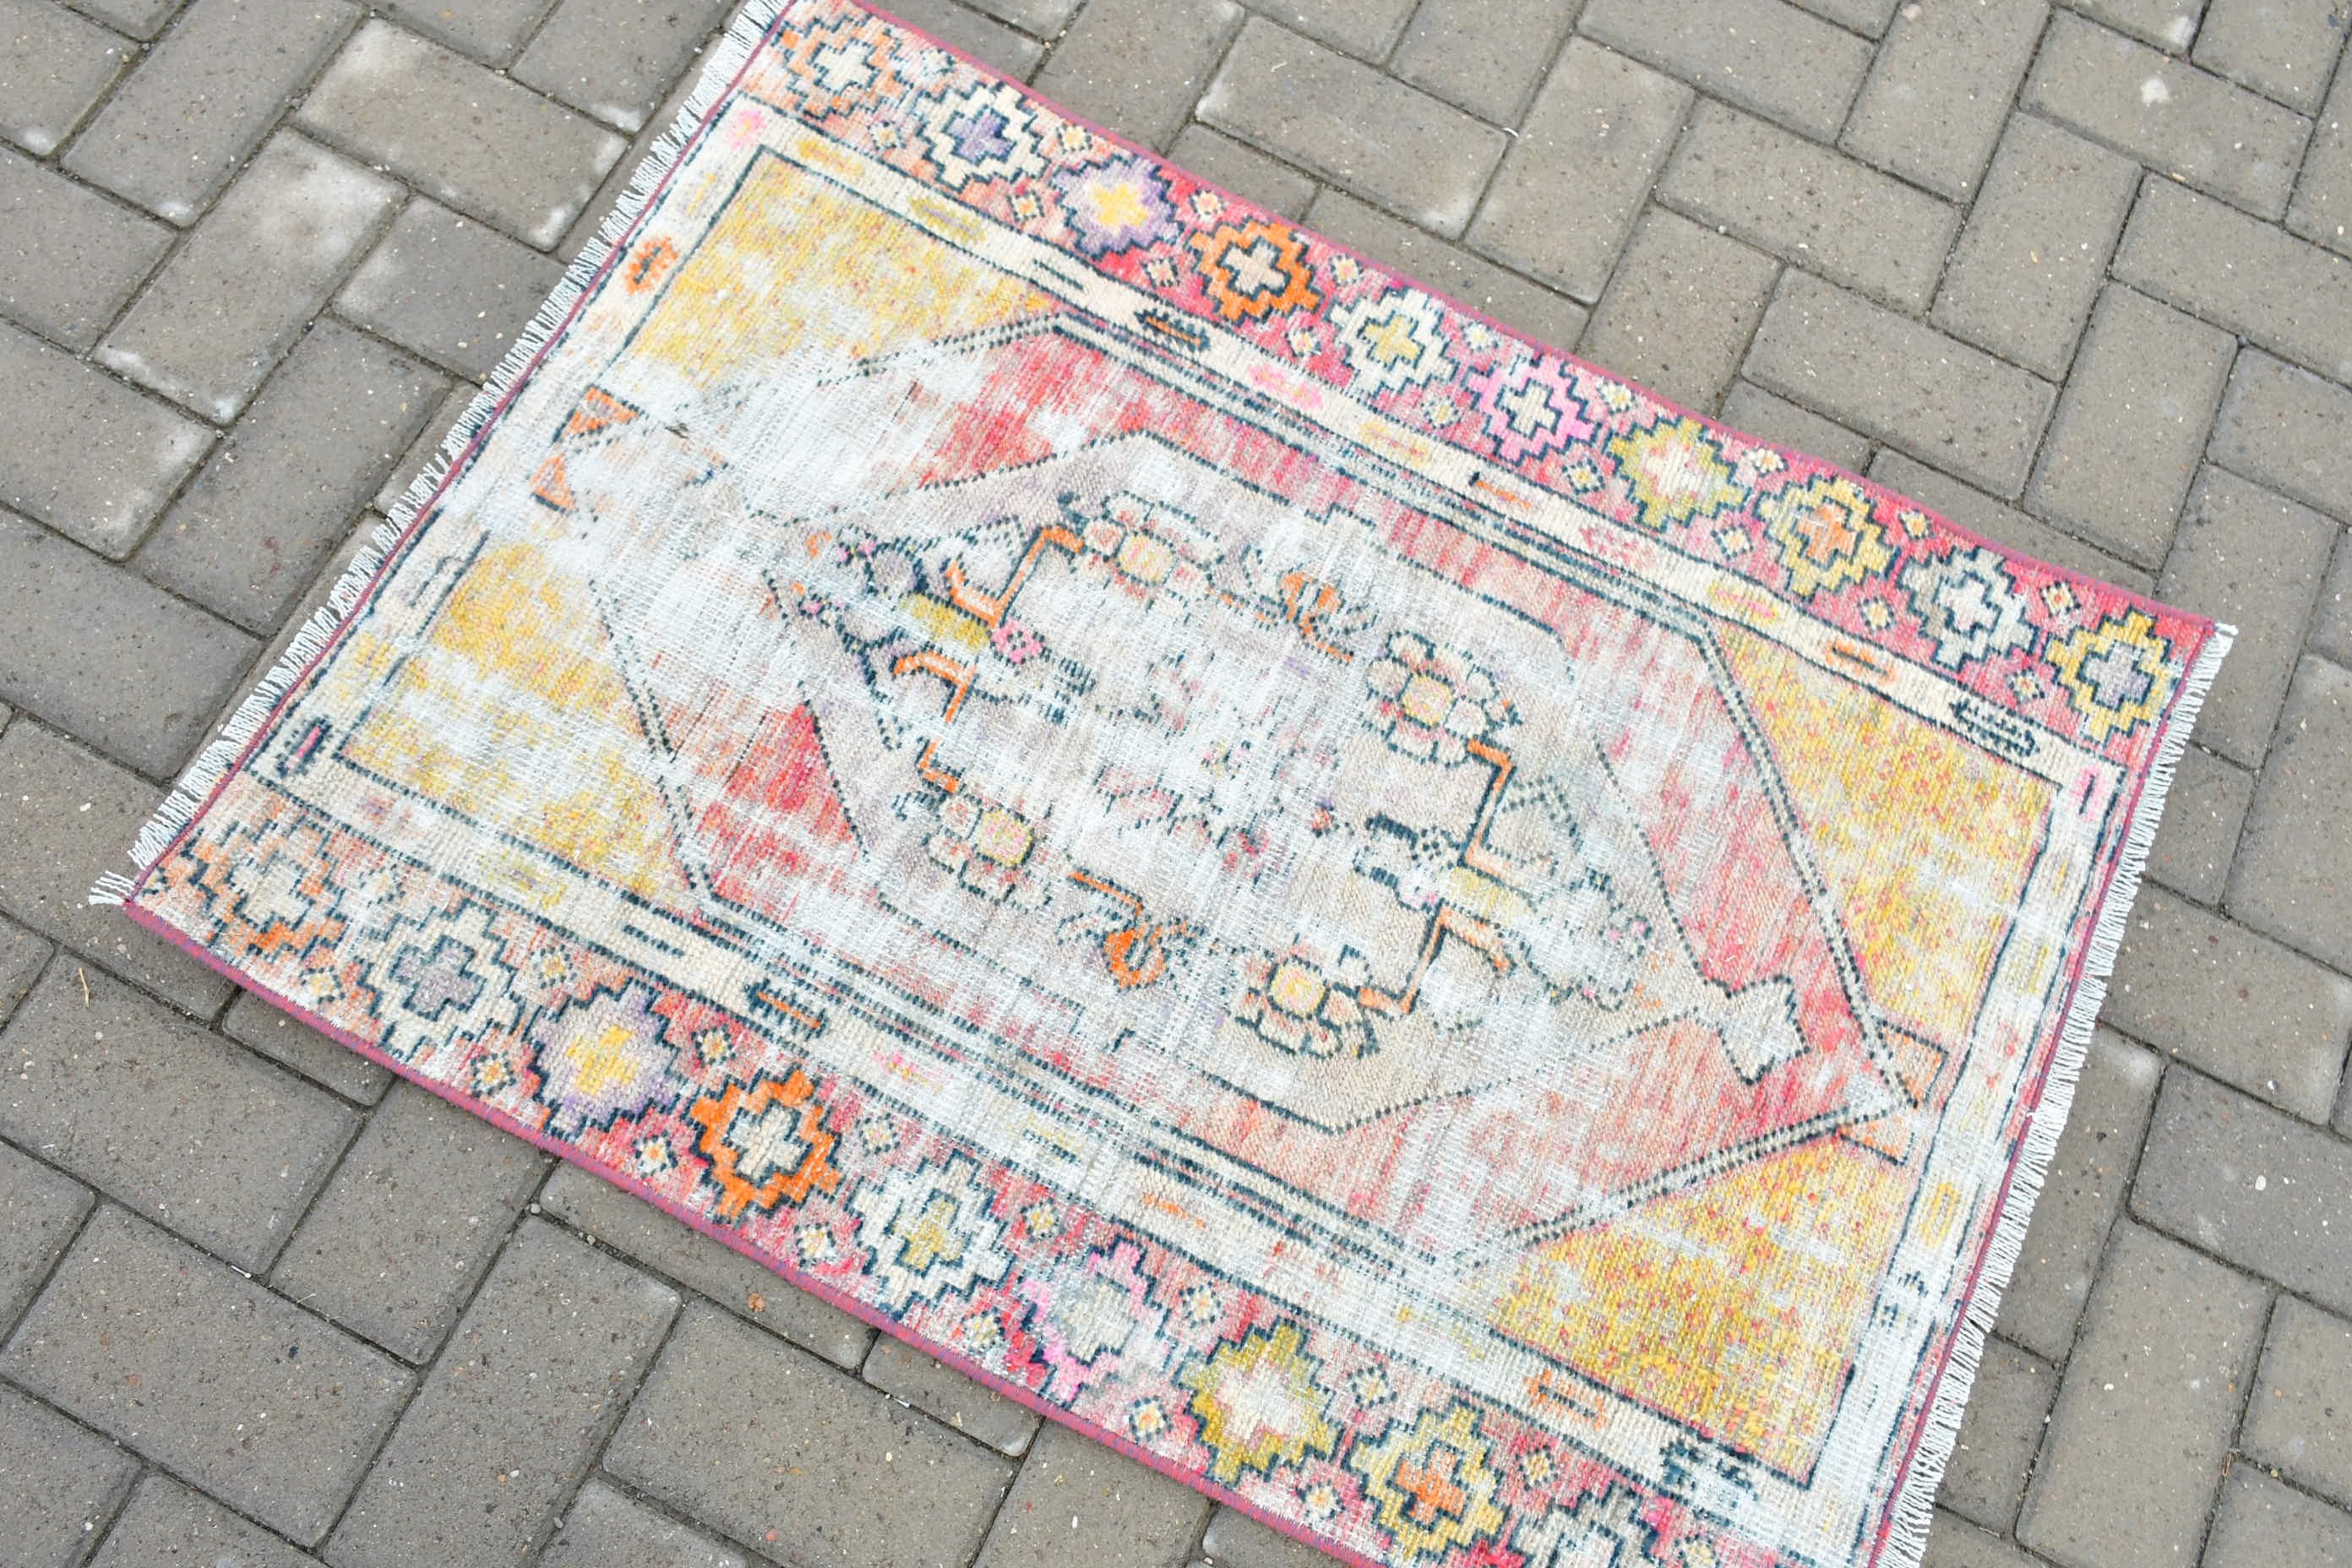 Turkish Rug, 2.5x3.3 ft Small Rug, Vintage Rugs, Red Home Decor Rugs, Muted Rug, Wall Hanging Rug, Kitchen Rug, Wool Rug